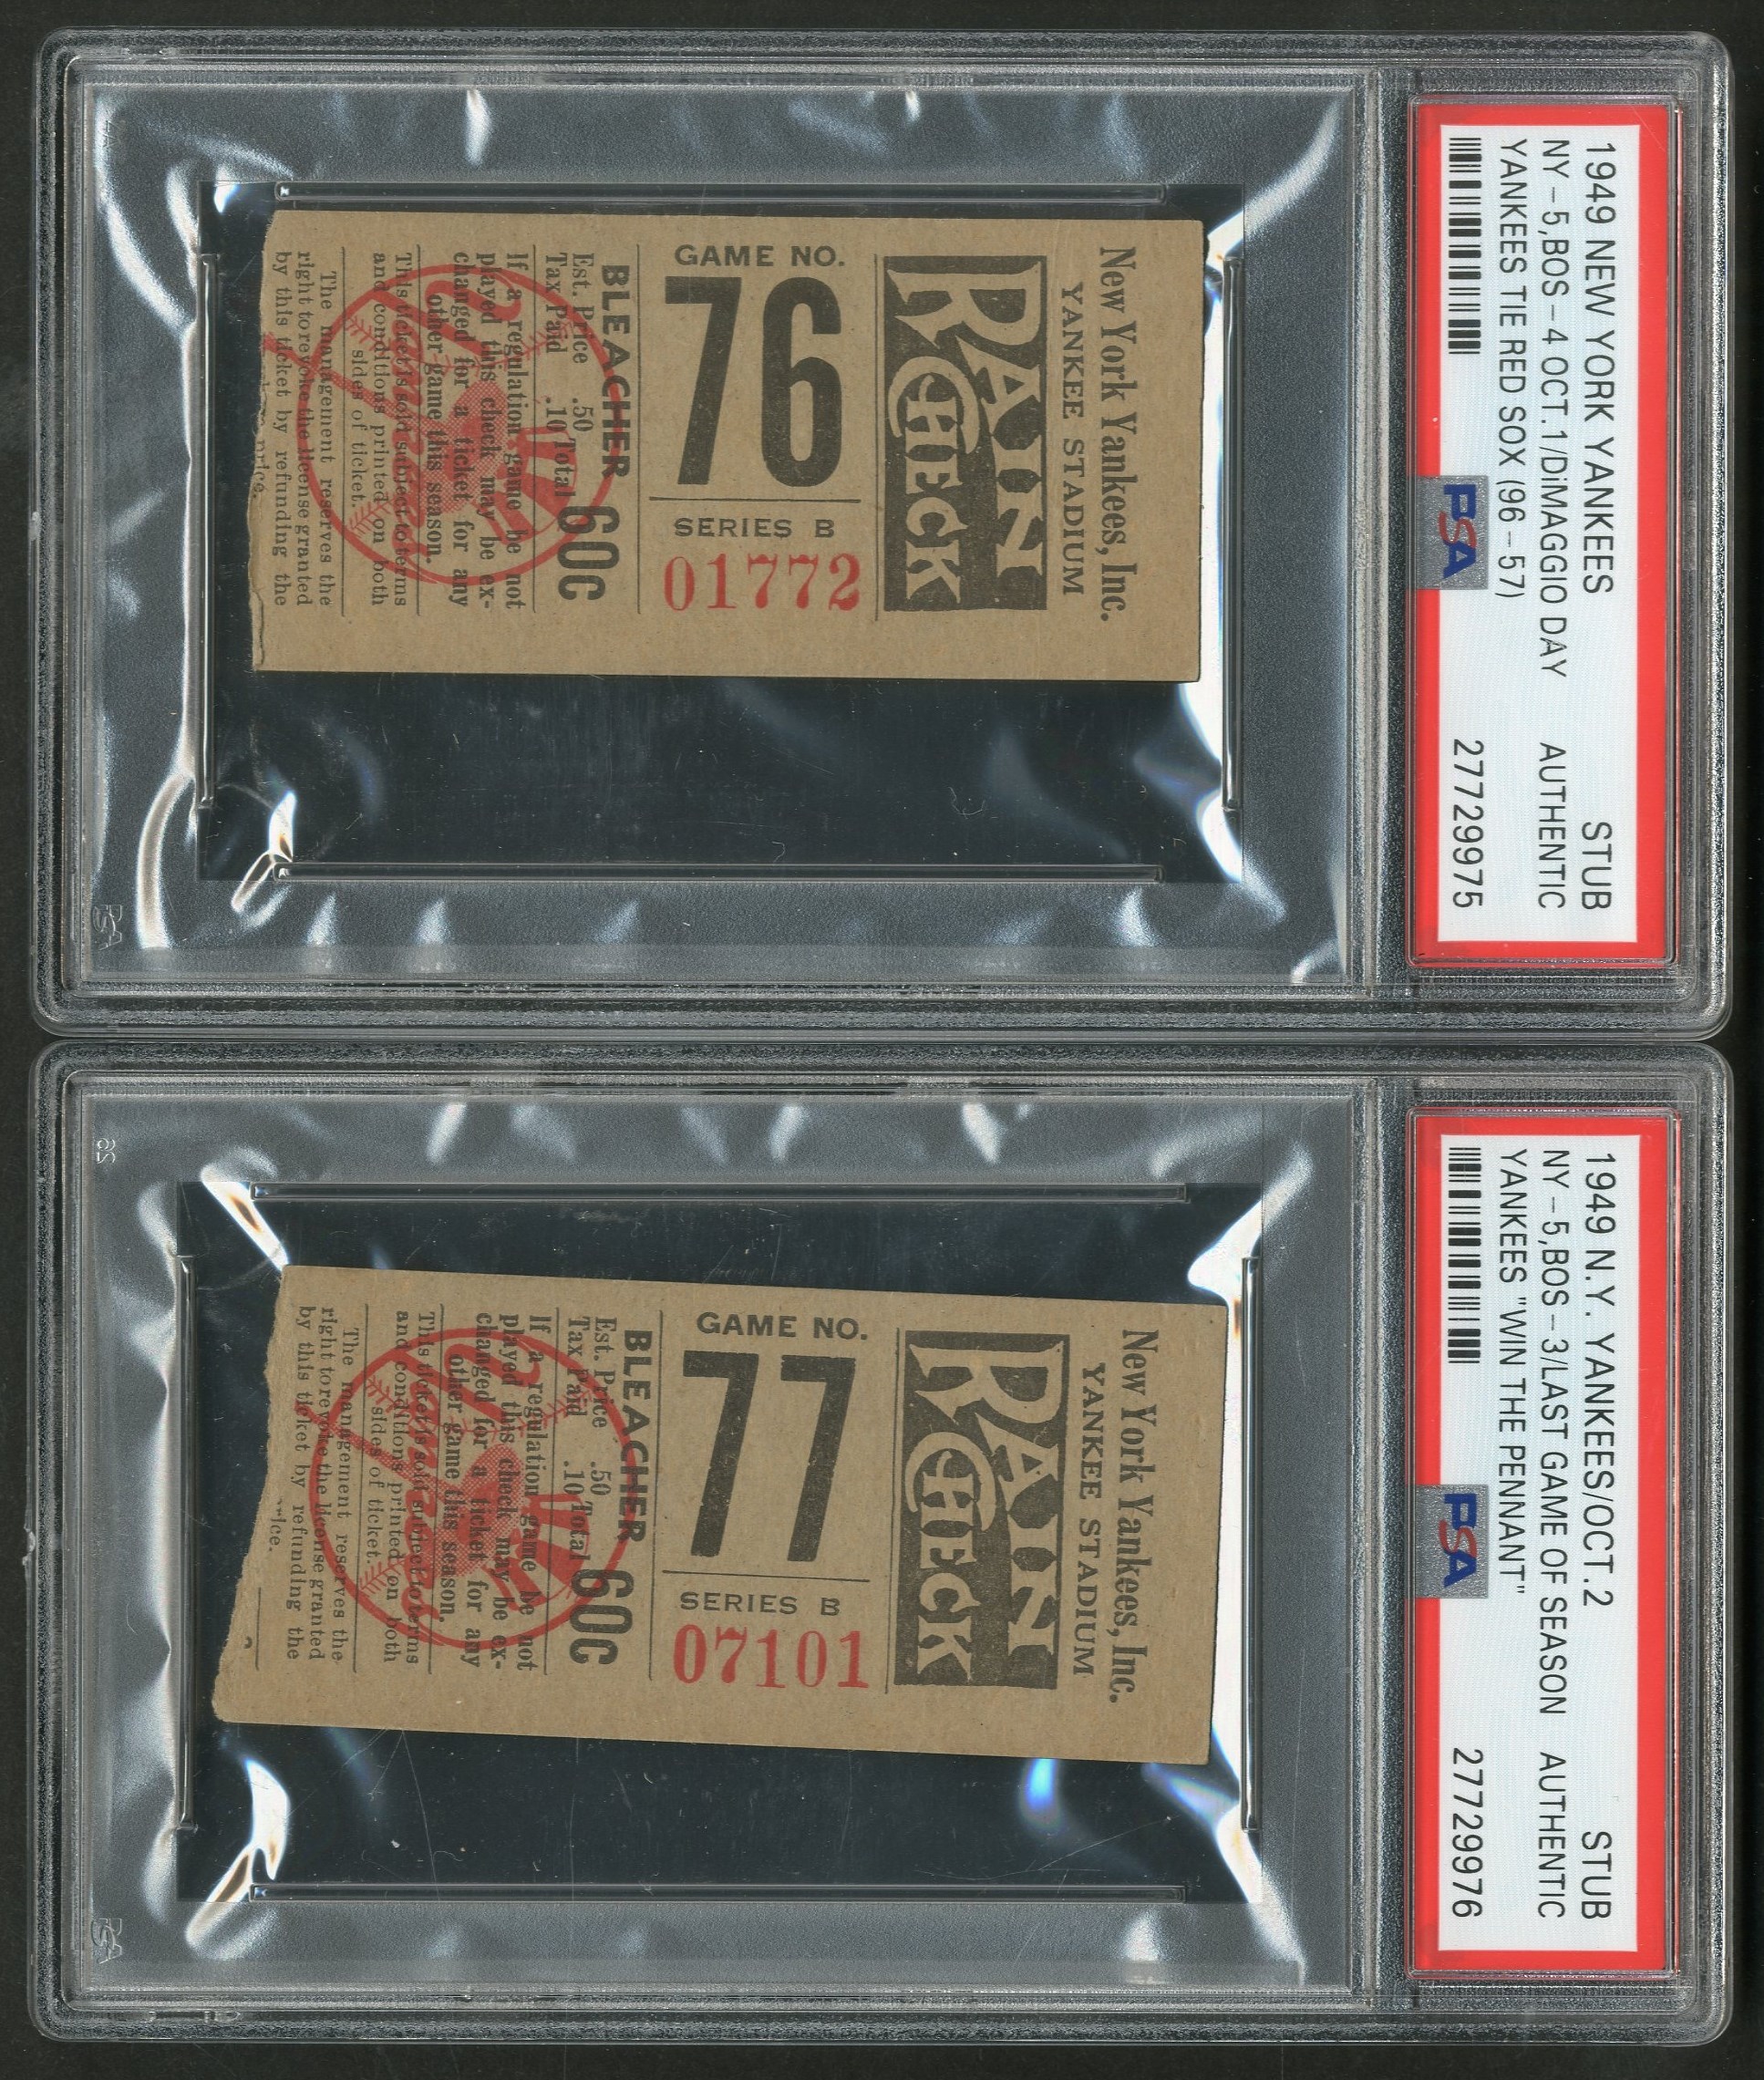 - Important 1949 New York Yankees Tie Red Sox & Yankees "Win the Pennant" Ticket Stubs - DiMaggio Day (PSA)